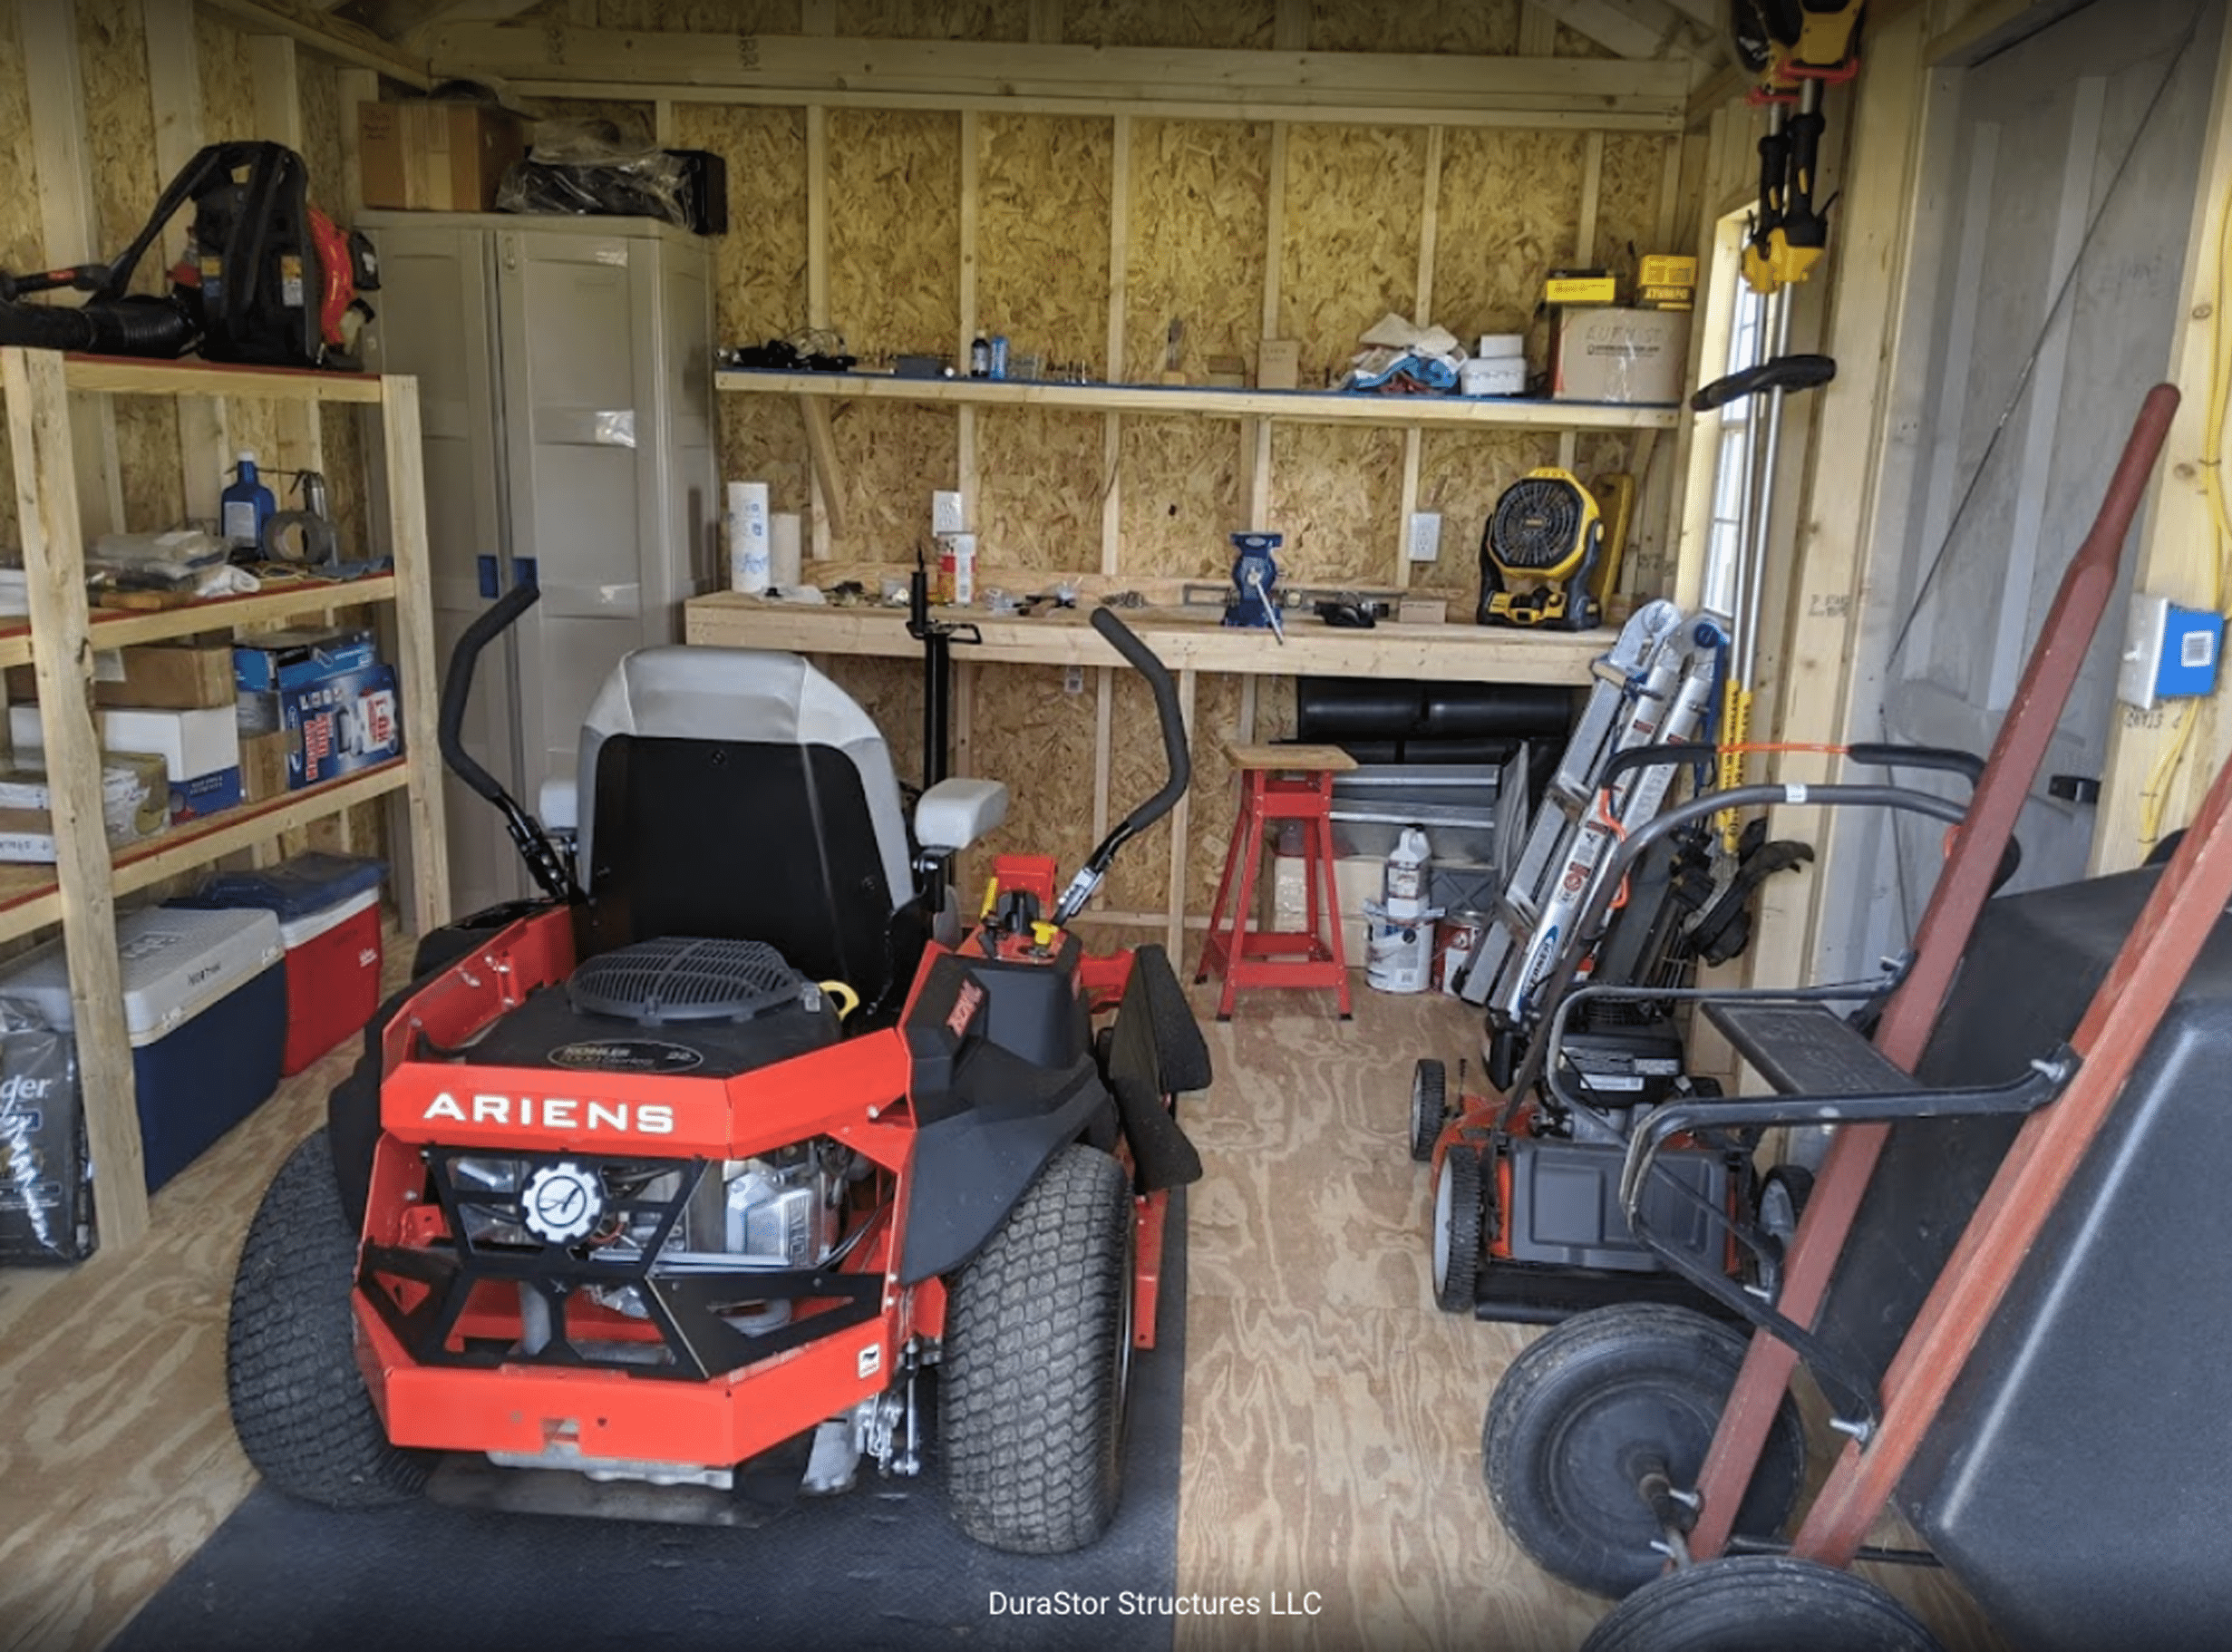 what can you fit in a portable car garage